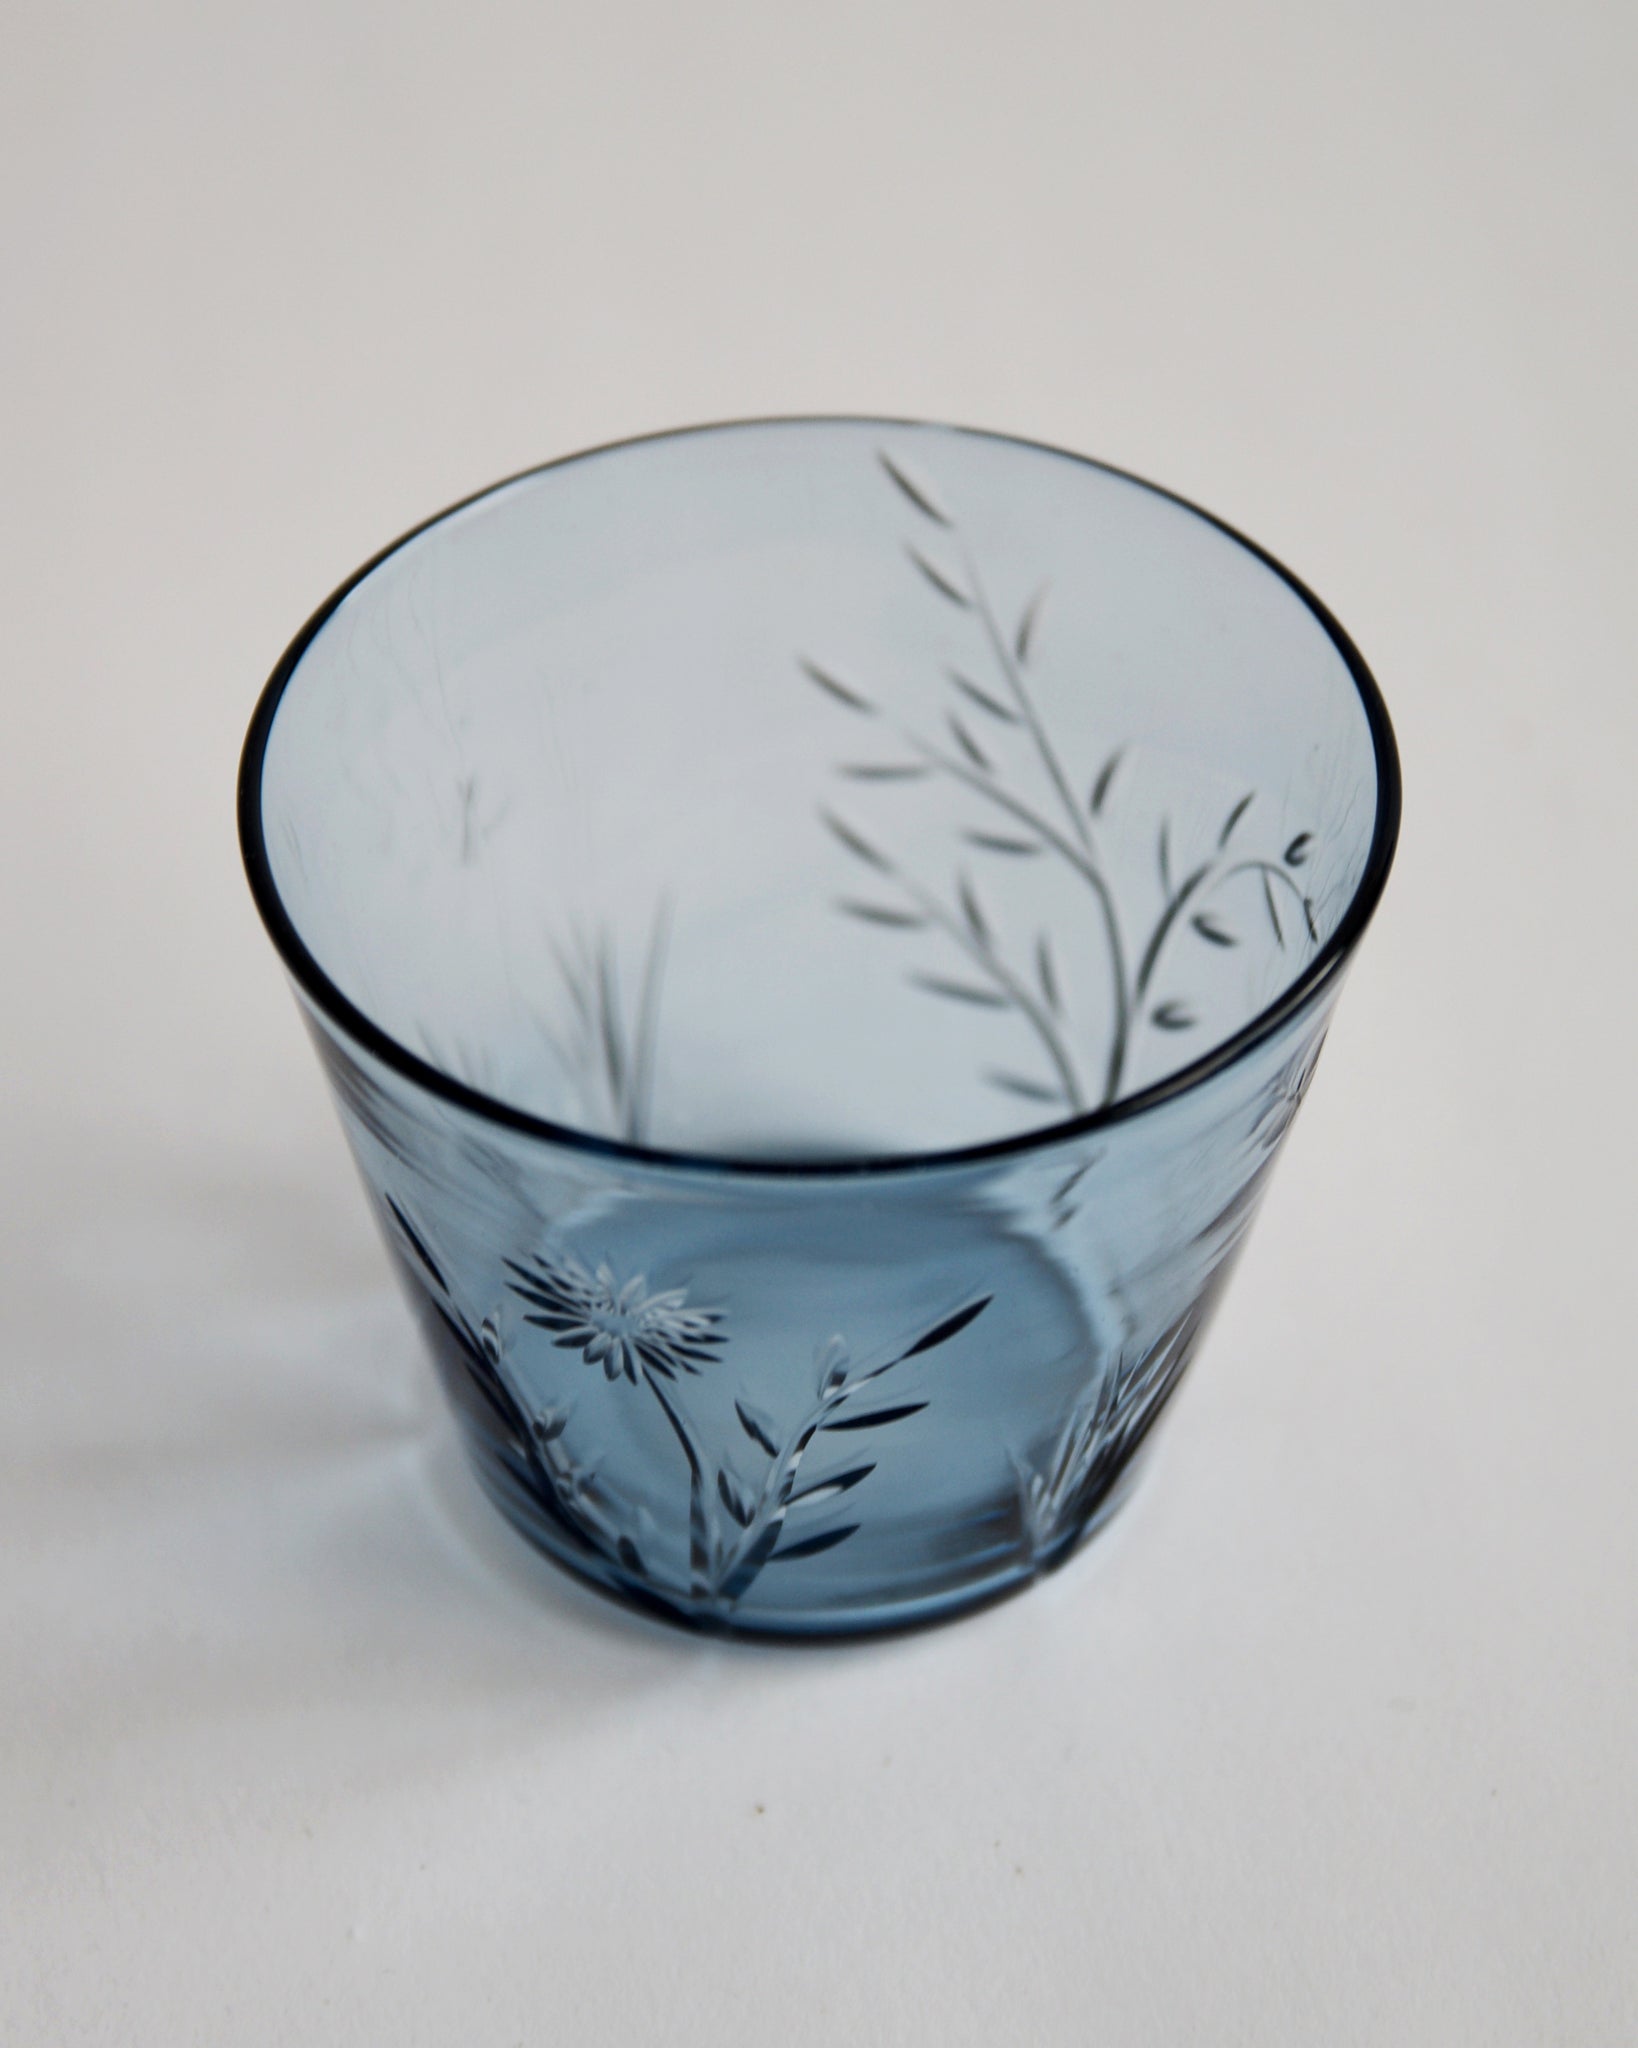 Detailed top view of the reclaimed blue ms.garden daily cup in light blue. Features a focus on carved flower and leaves pattern in front of the cup.